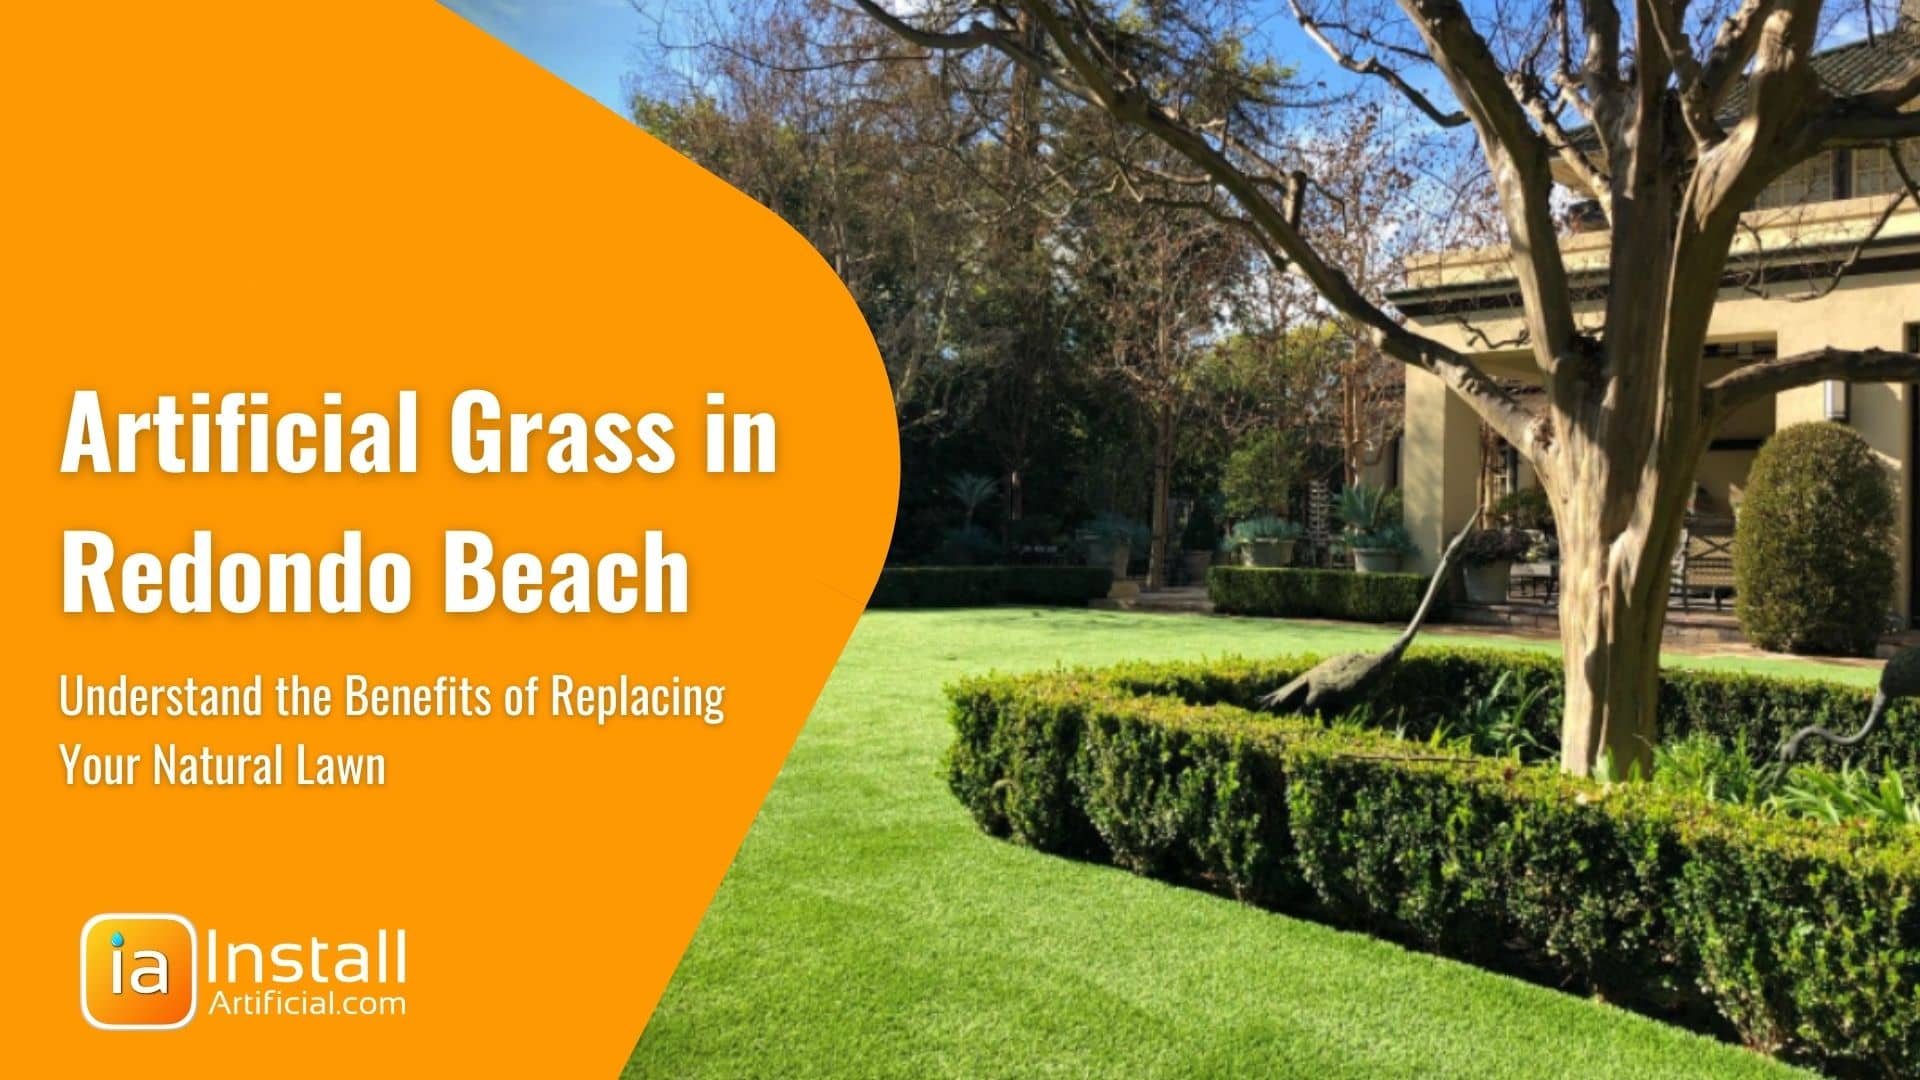 Replace Your Lawn With Artificial Turf in Redondo Beach